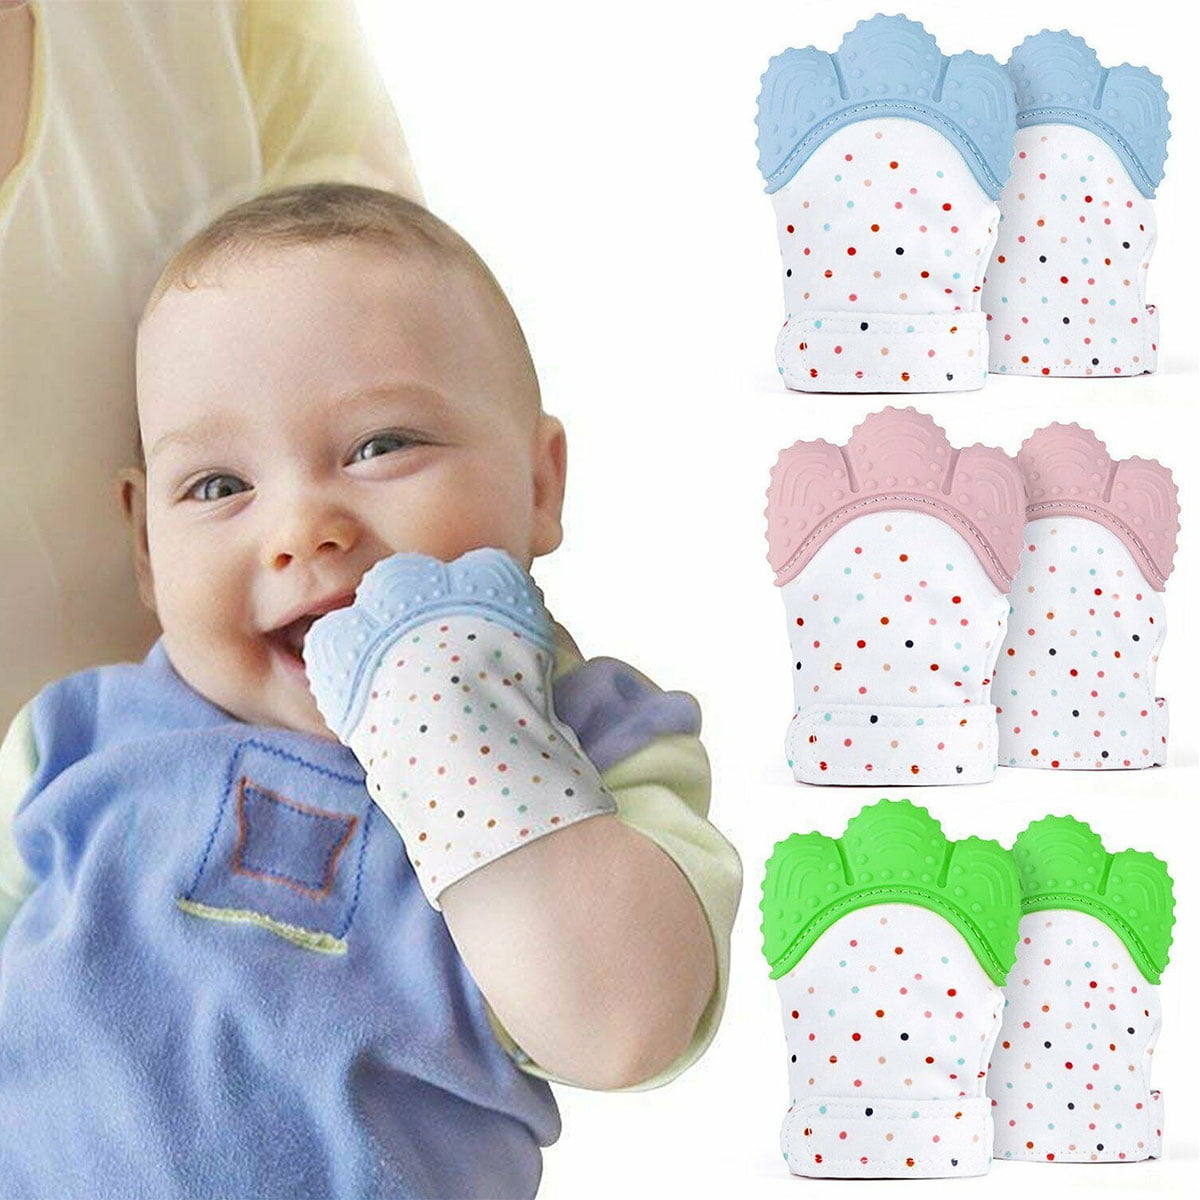 Baby Infant Silicone Anti-bite Mitts Teething Mitten Glove Wrapper Soft Teether 